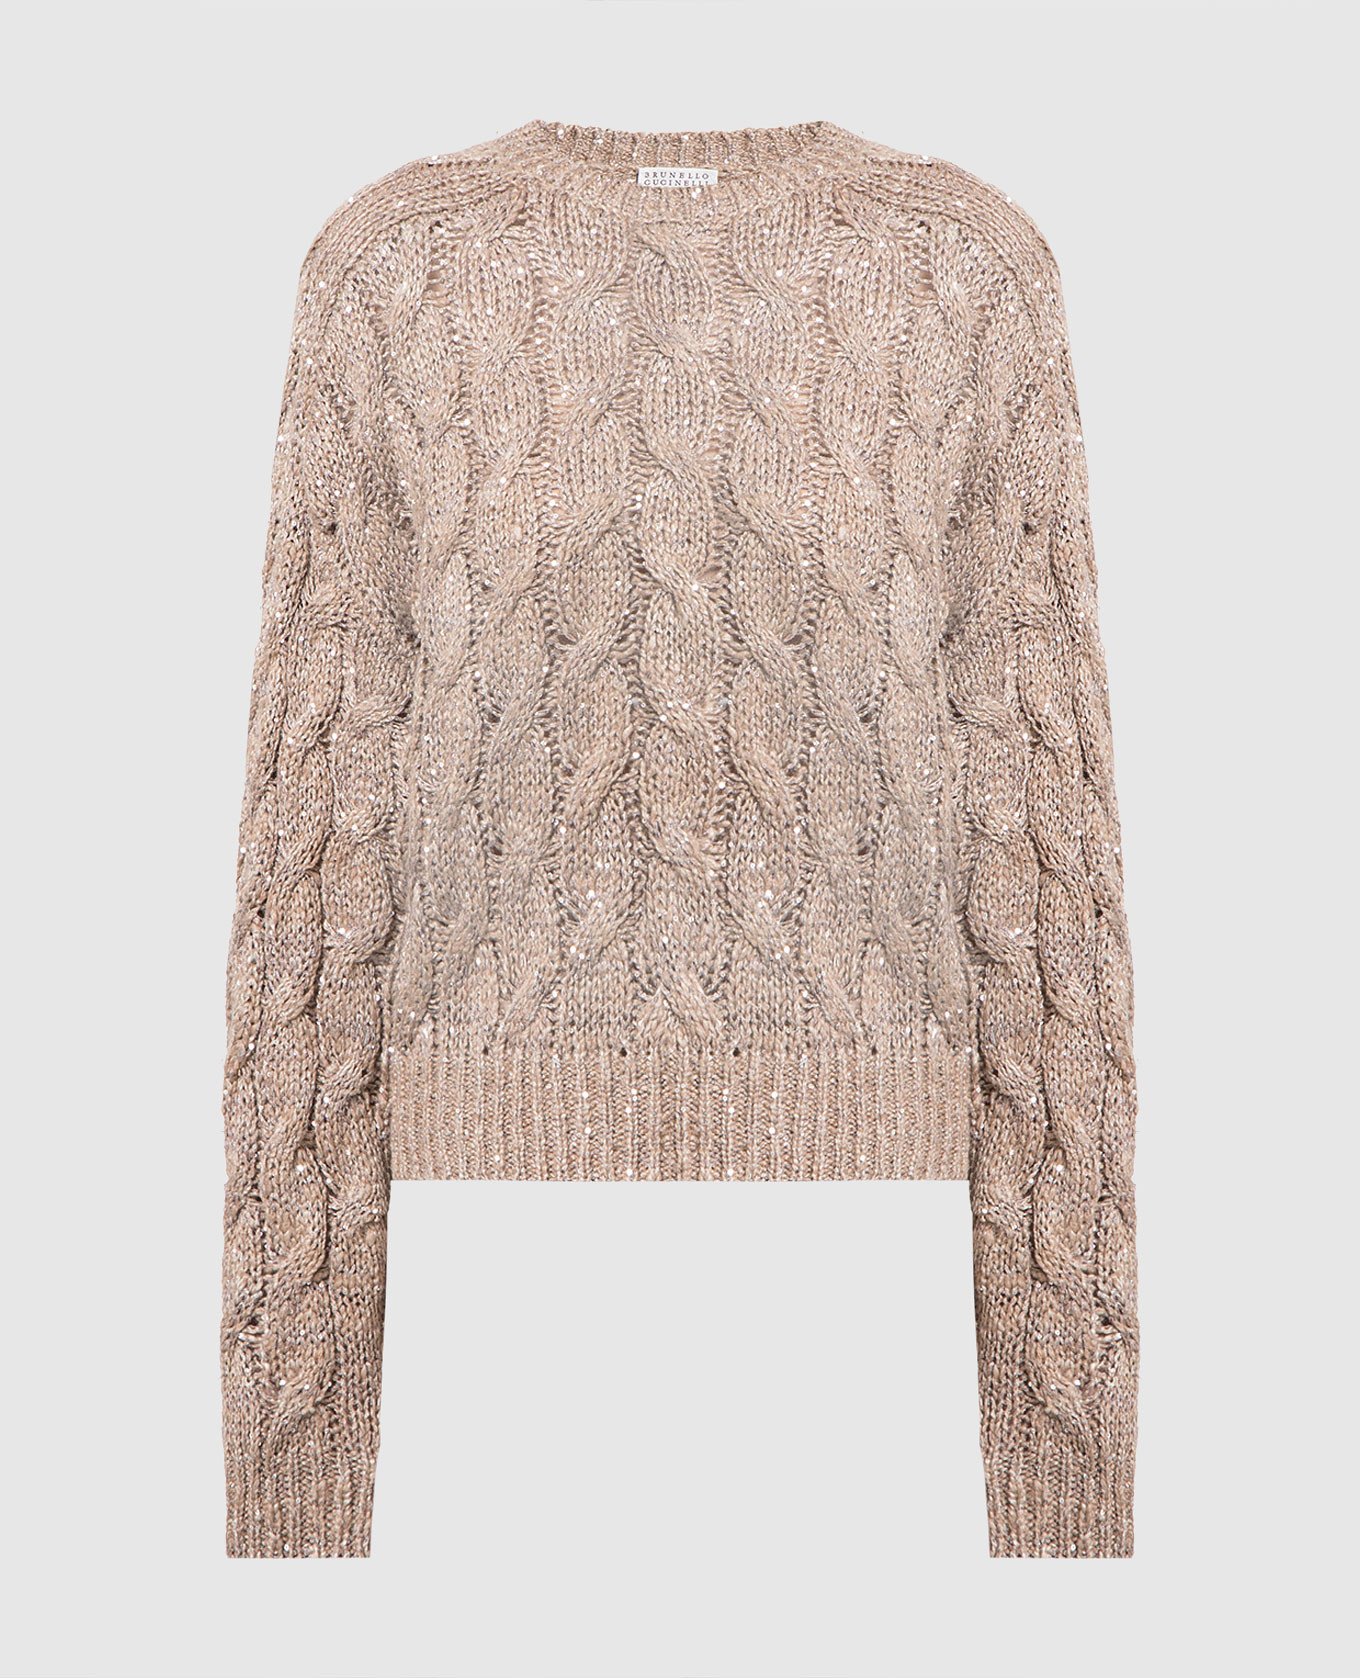 Beige sweater with sequins